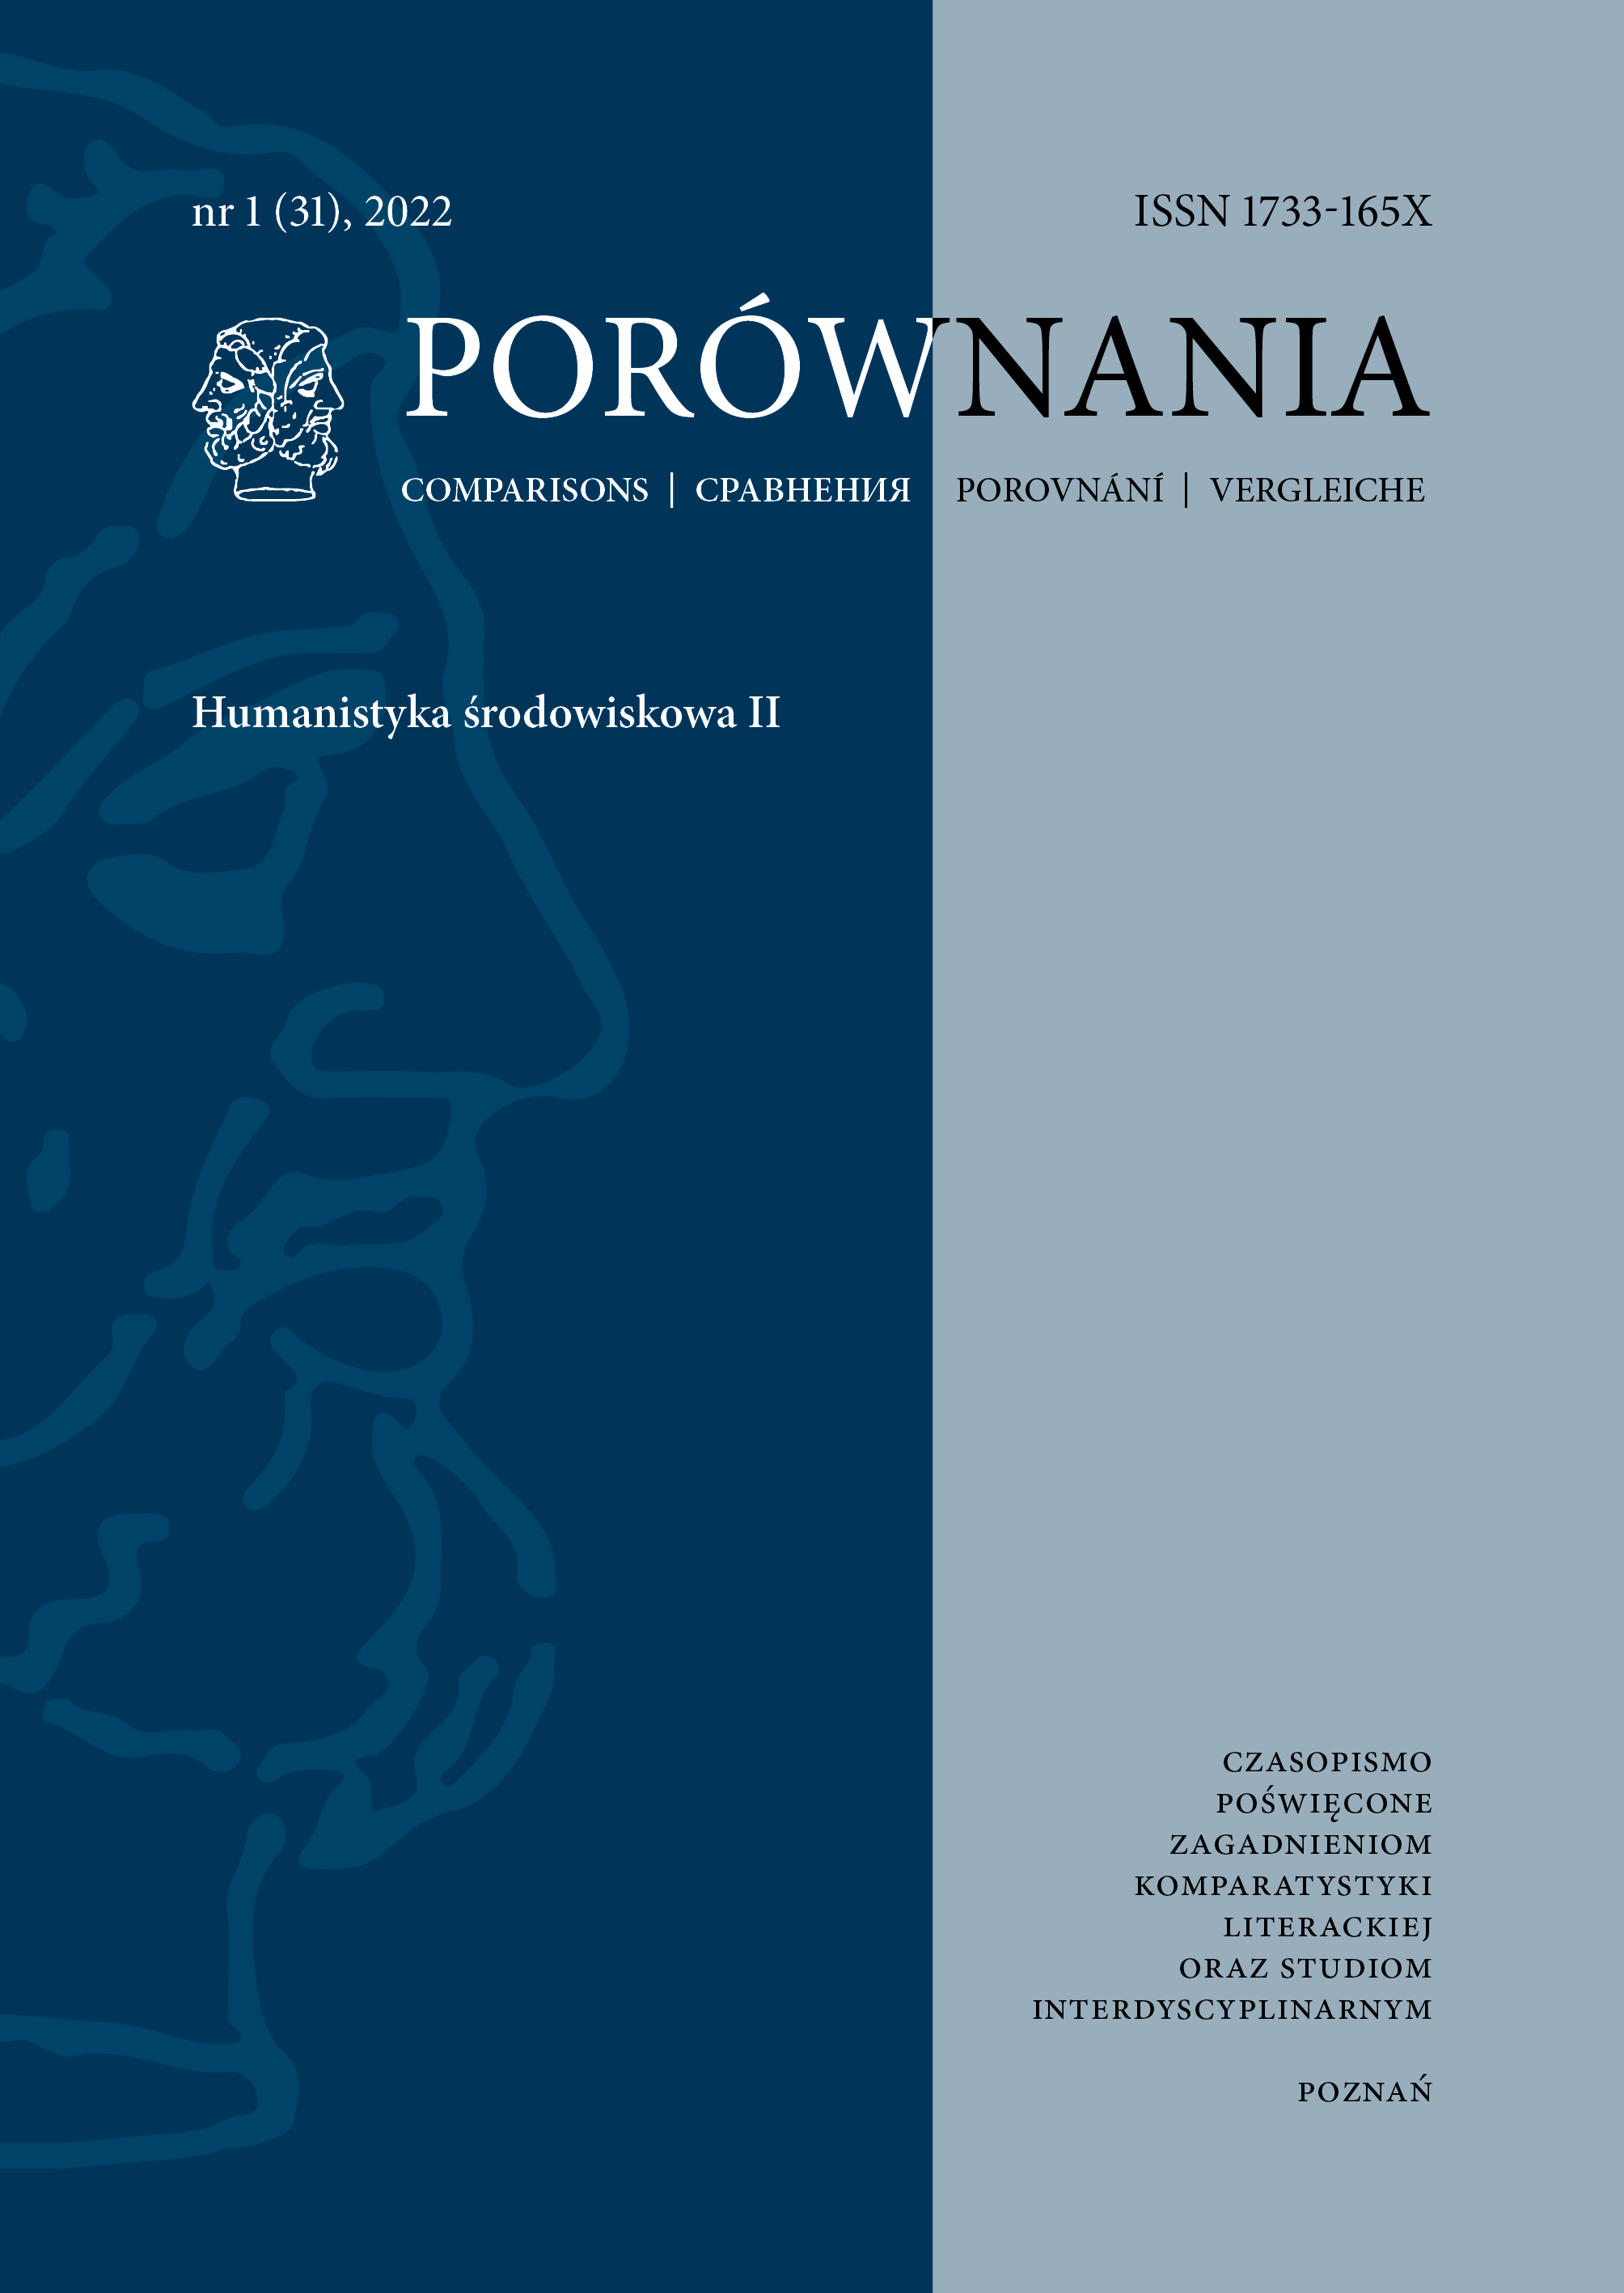 Central European Cultural Transfers in the Humanism and Baroque Periods: Three Examples from Literary History